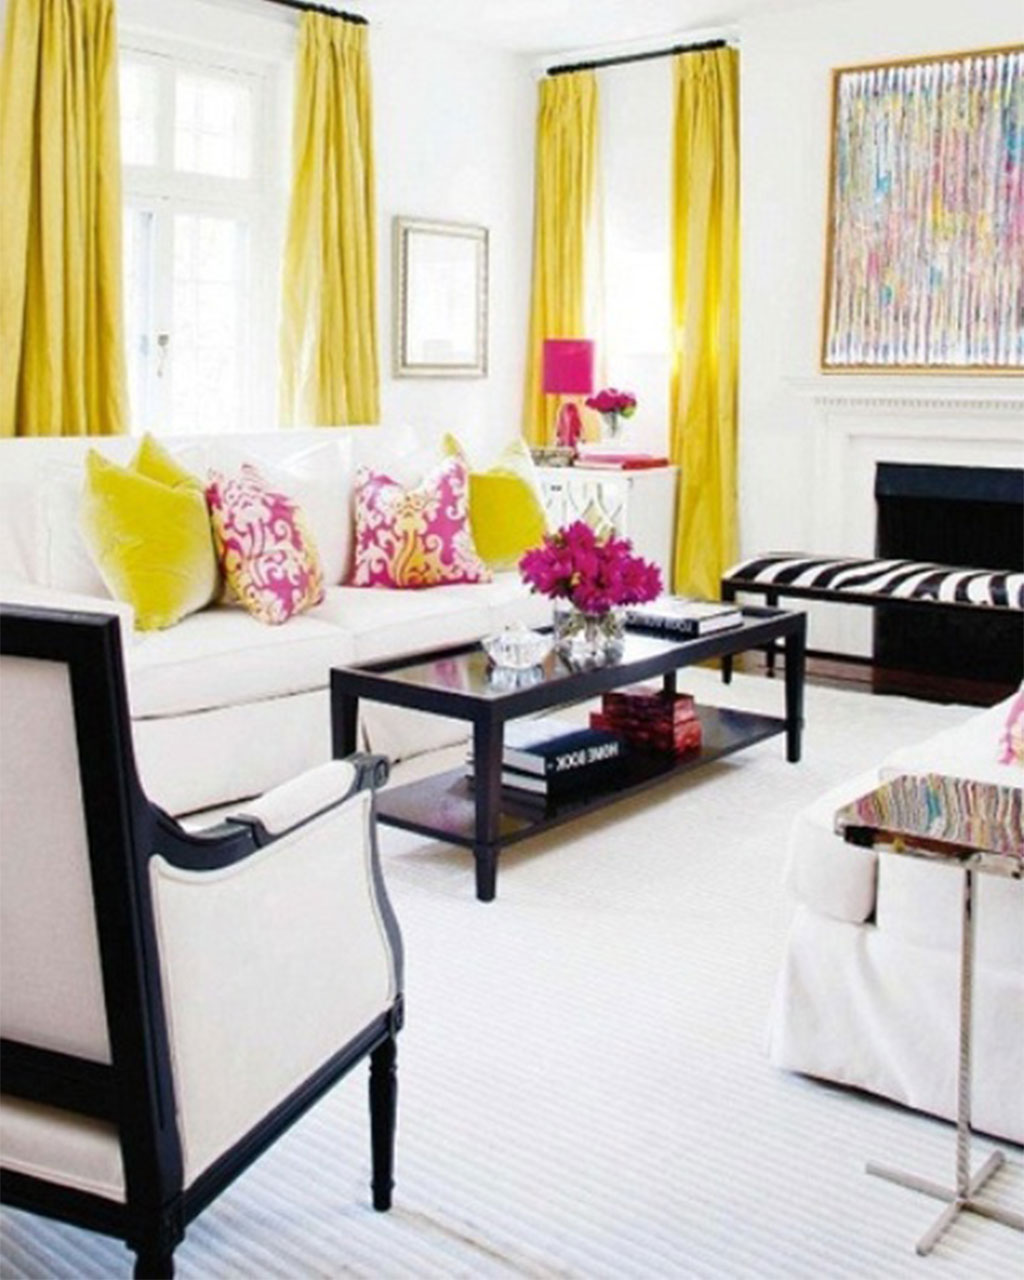 36 Living Room Decorating Ideas That Smells Like Spring - Decoholic